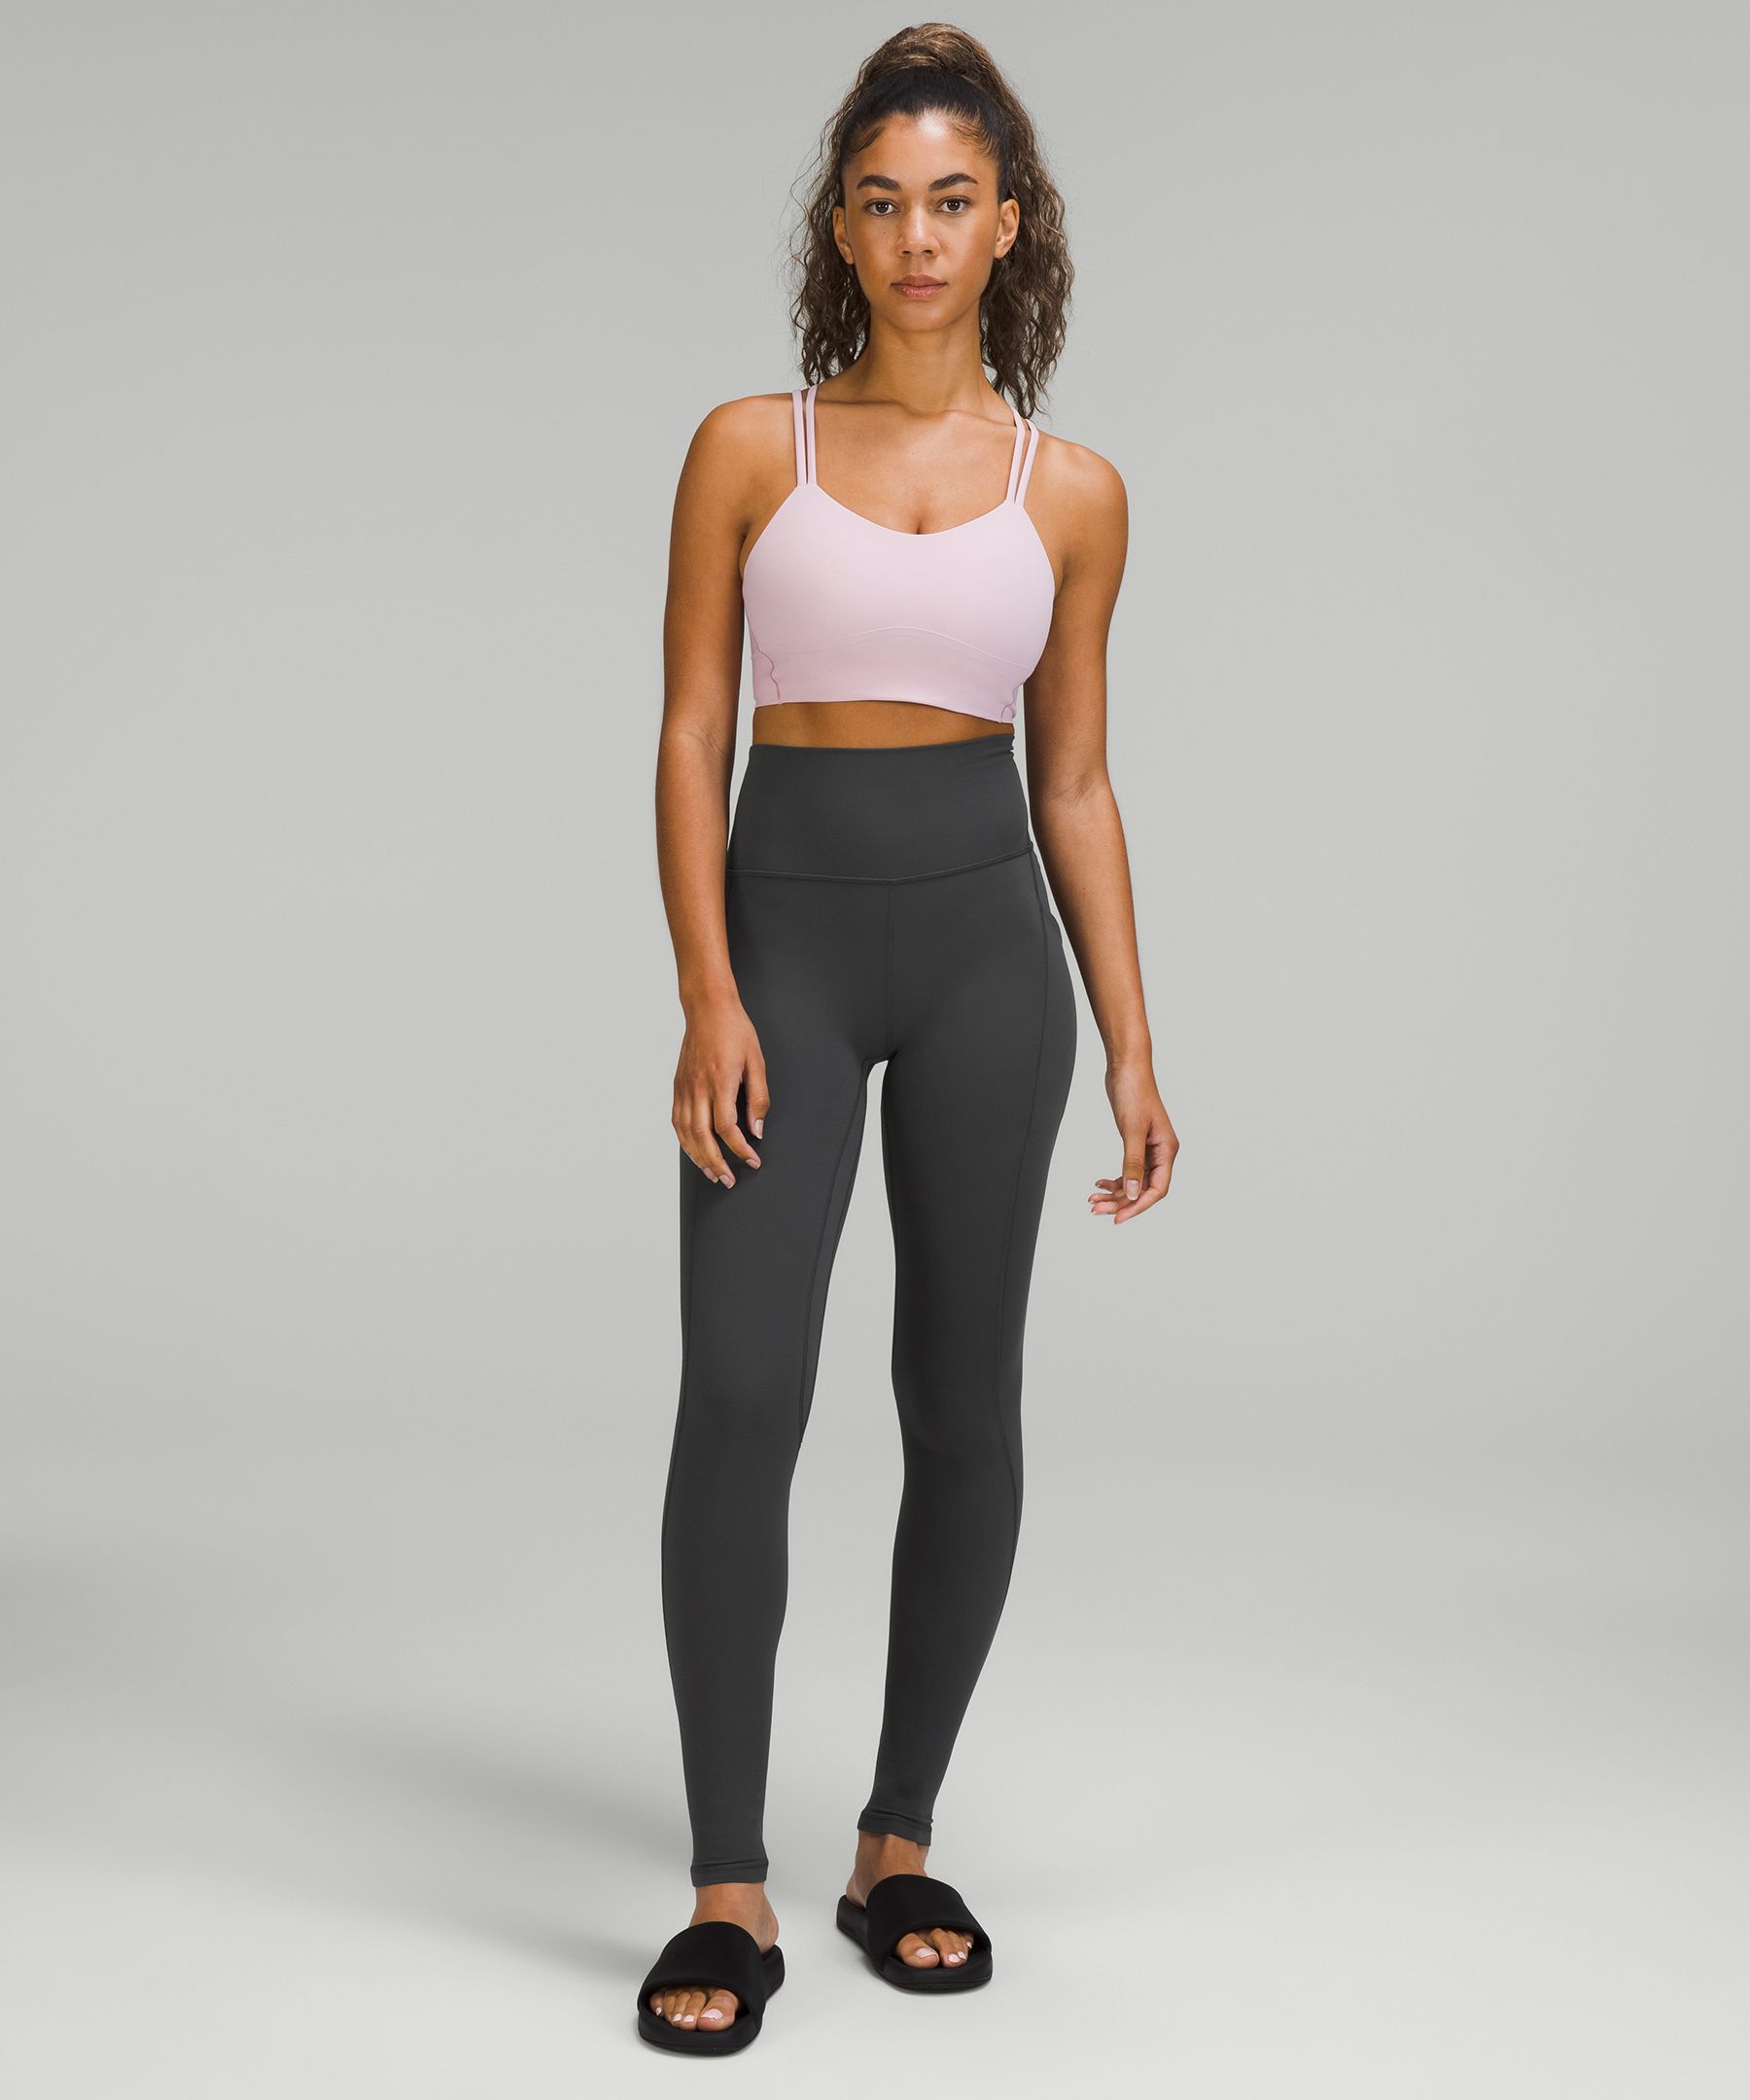 lululemon Align™ High-Rise Pant with Pockets 31, Women's Leggings/Tights